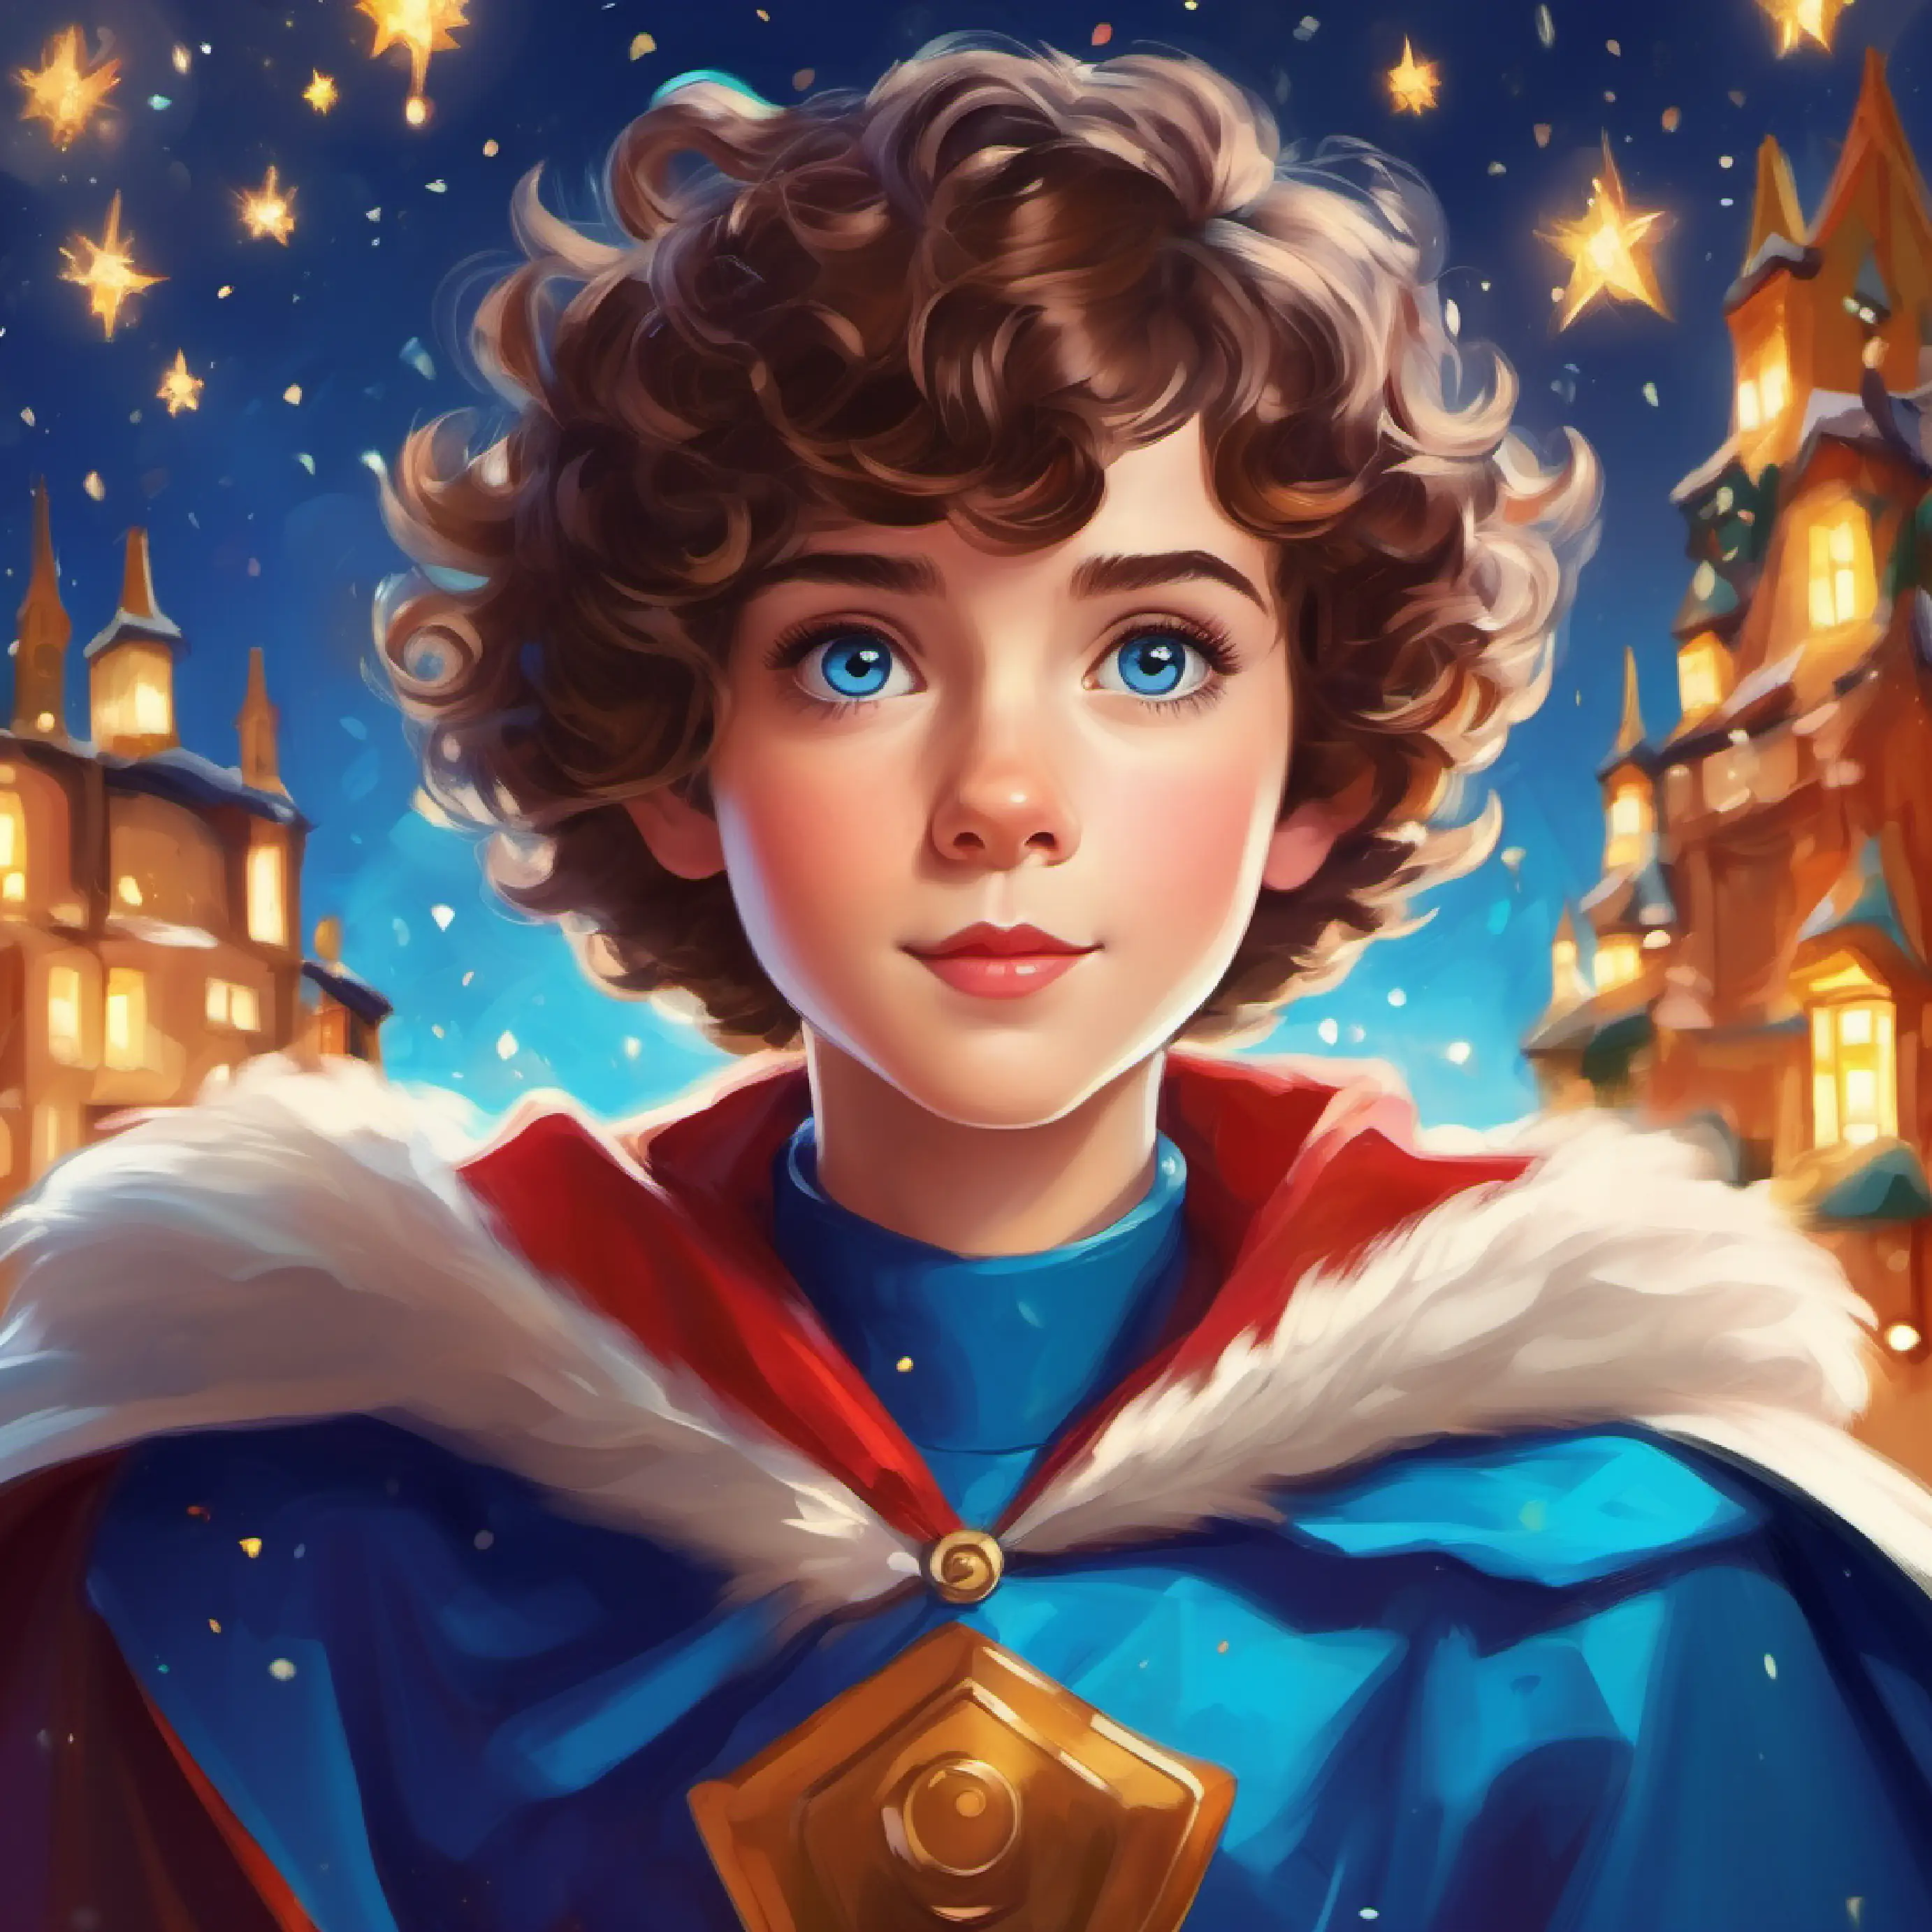 Short, curly hair, bright blue eyes, wearing a cape experiencing the power of imagination